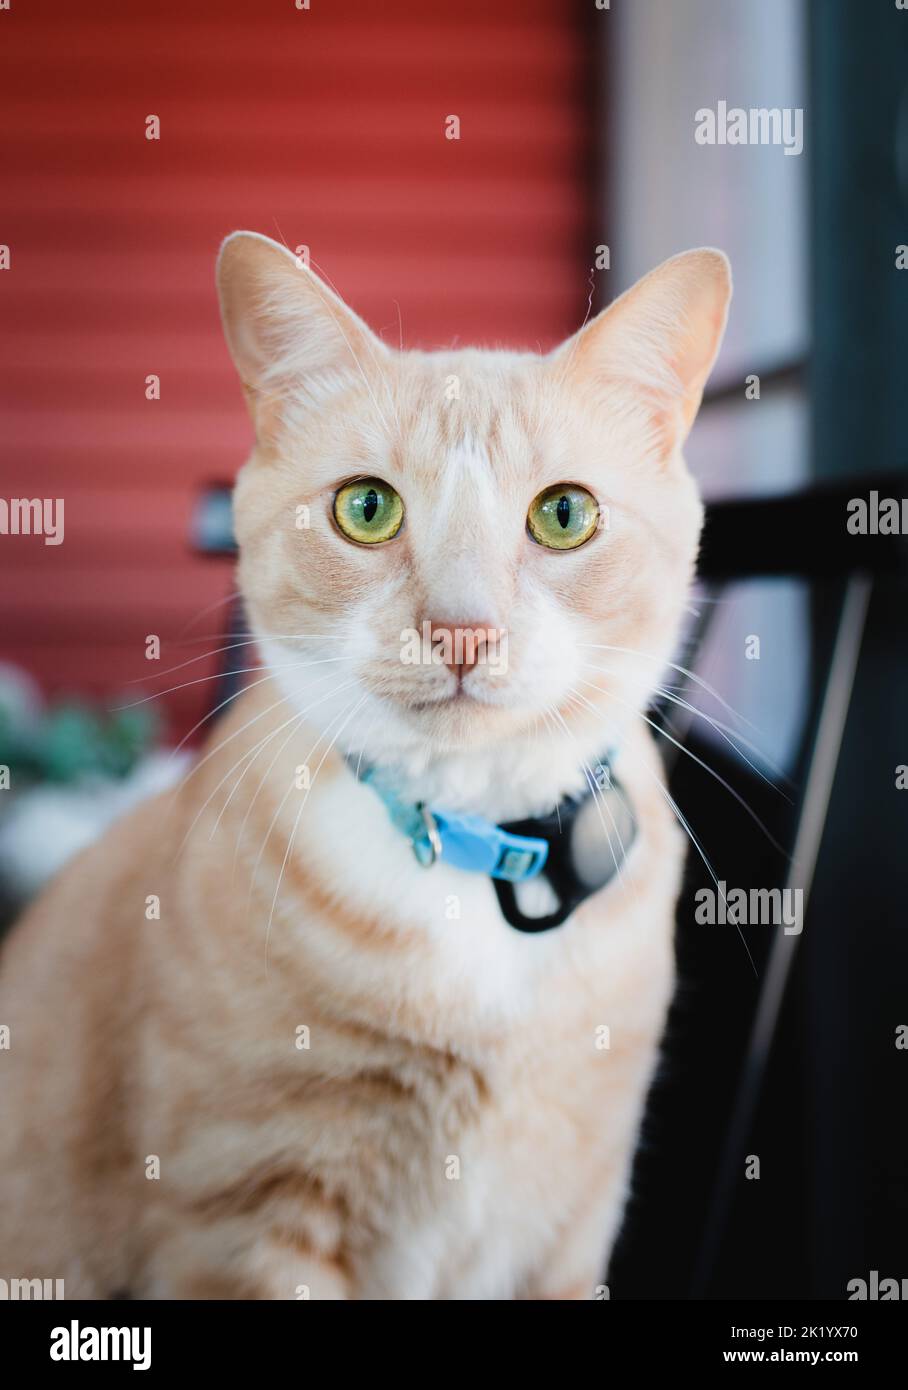 Close up of the face of a tabby cat with bright green eyes. Stock Photo